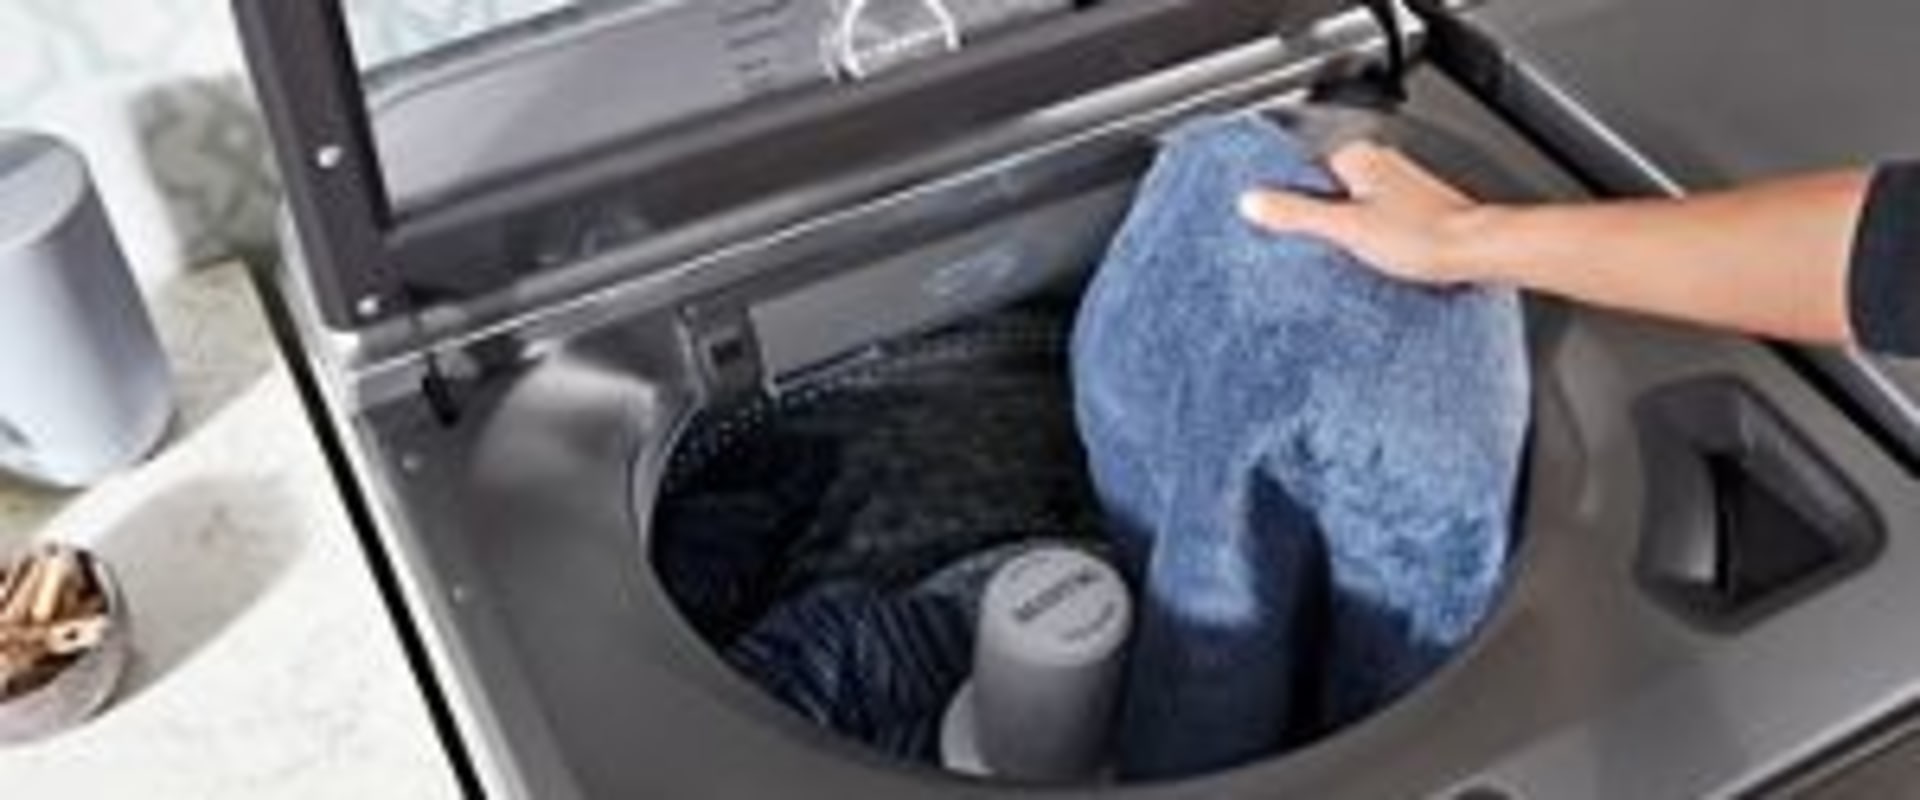 How to Stop Your Washing Machine from Leaking